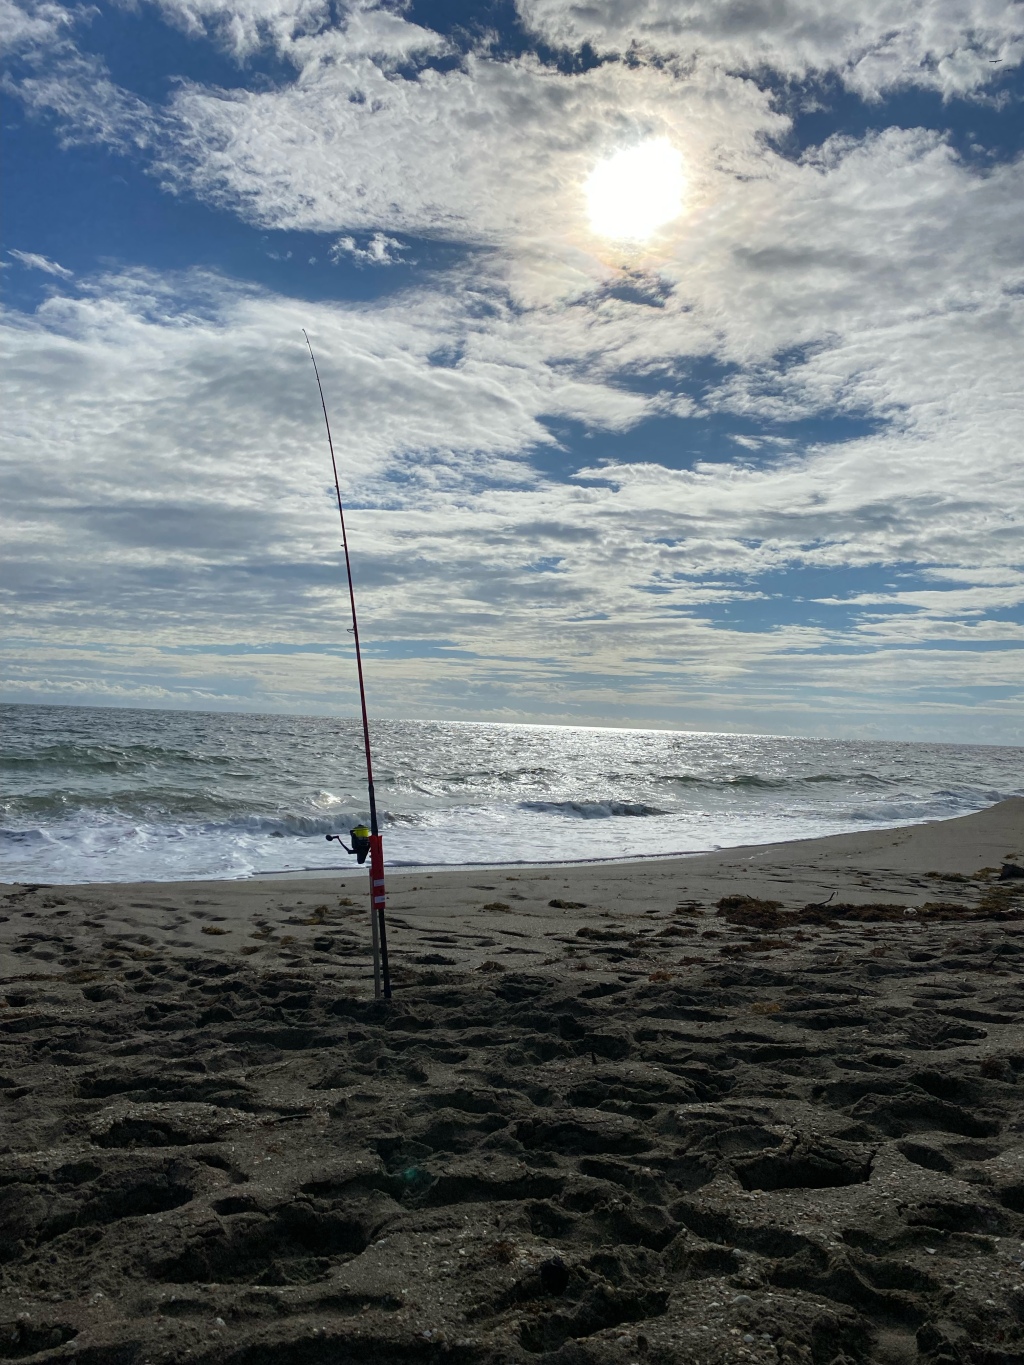 Surf Fishing with Family and Friends